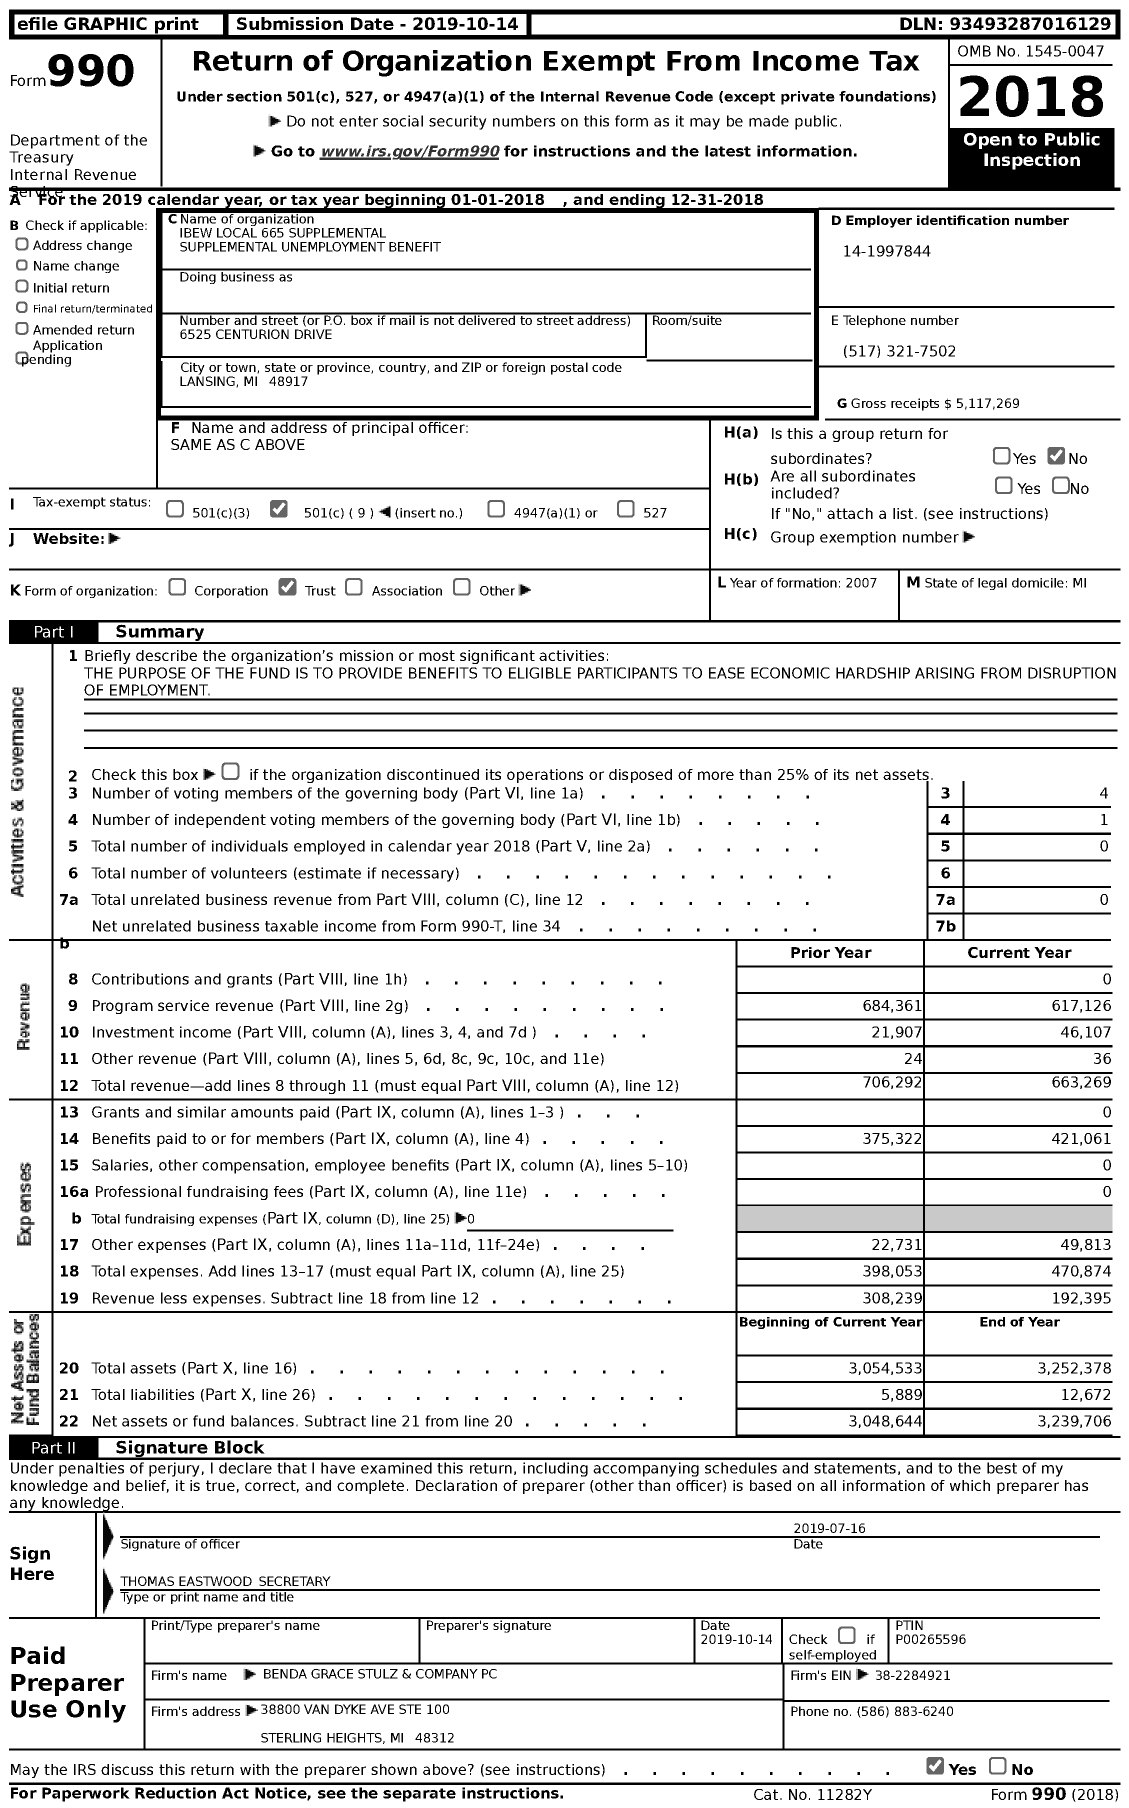 Image of first page of 2018 Form 990 for IBEW Local 665 Supplemental Supplemental Unemployment Benefit